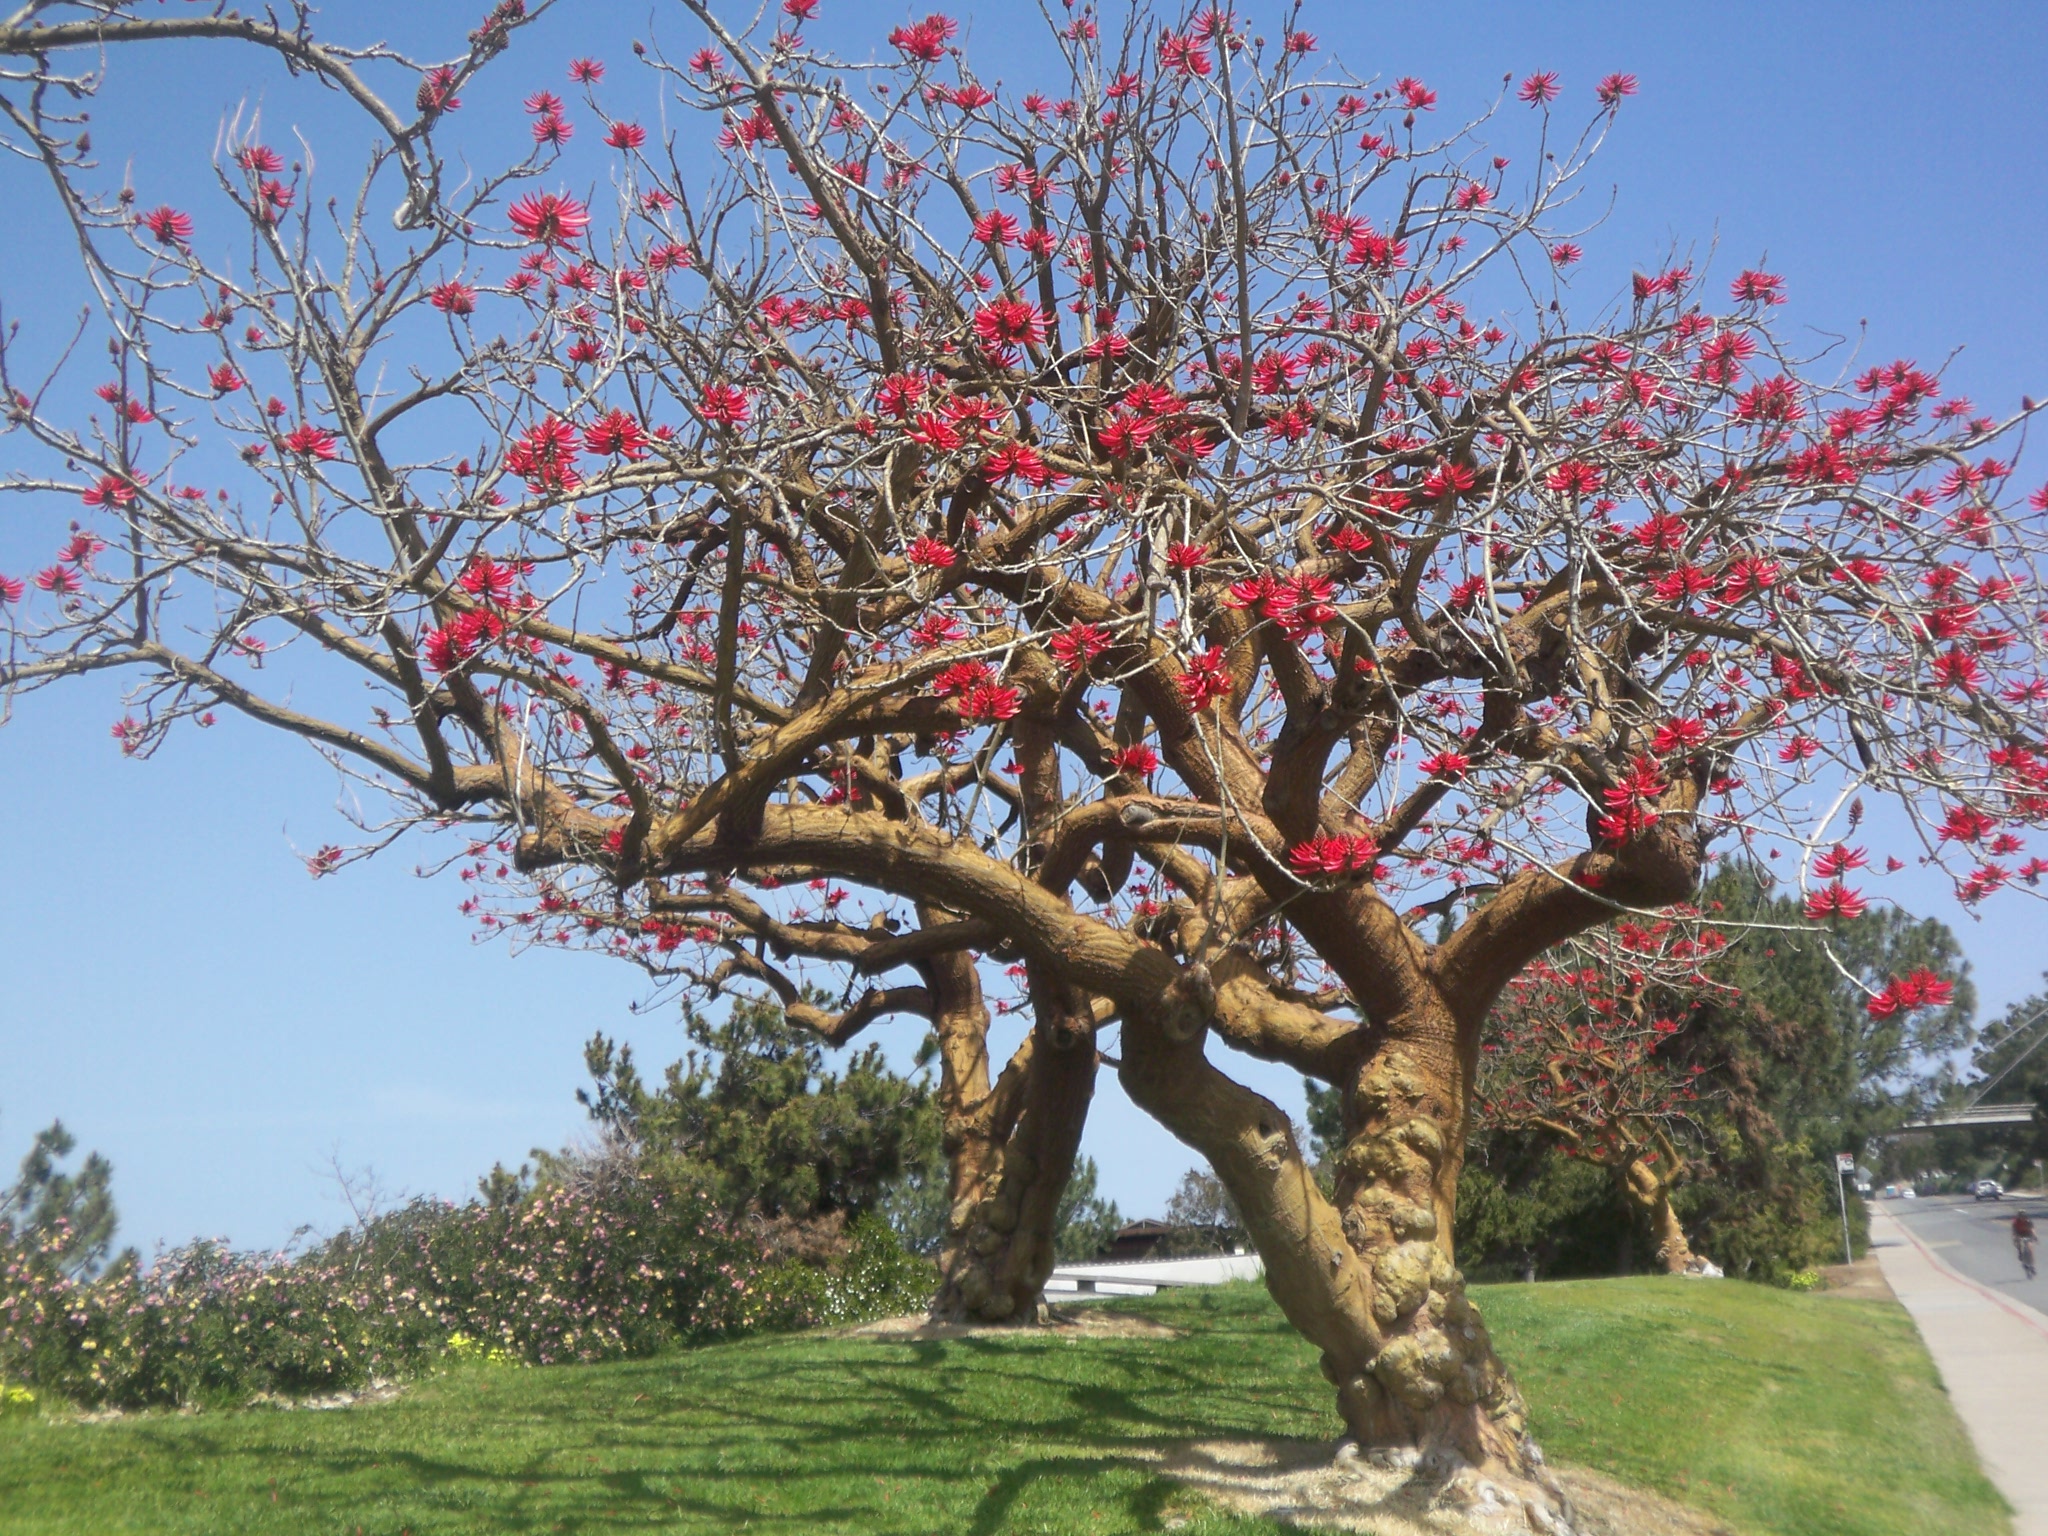 Blooming Trees in La Jolla | My Carlsbad Area Video and Photo Bloggery